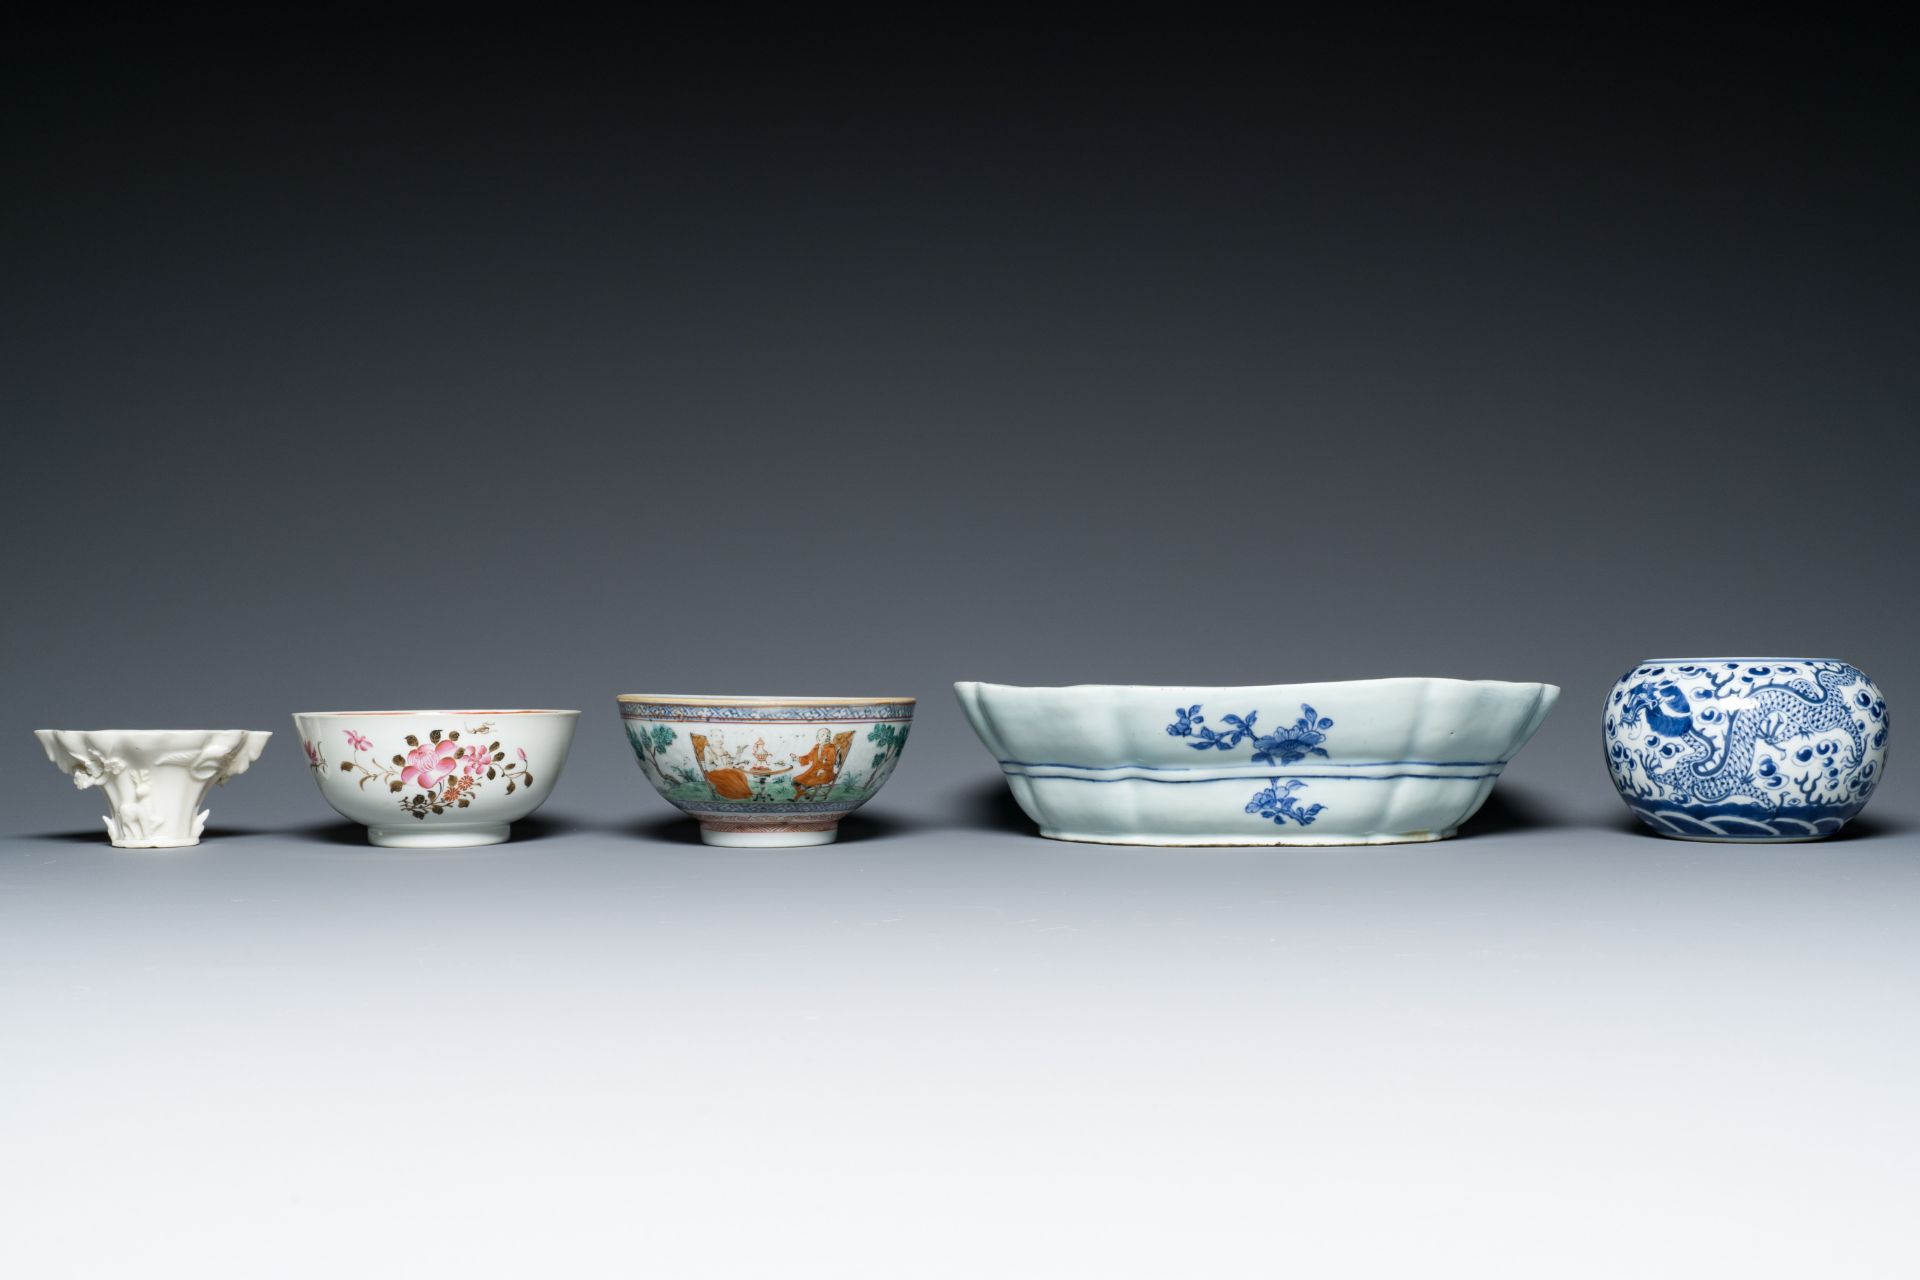 A varied collection of Chinese porcelain, 18/19th C. - Image 2 of 9